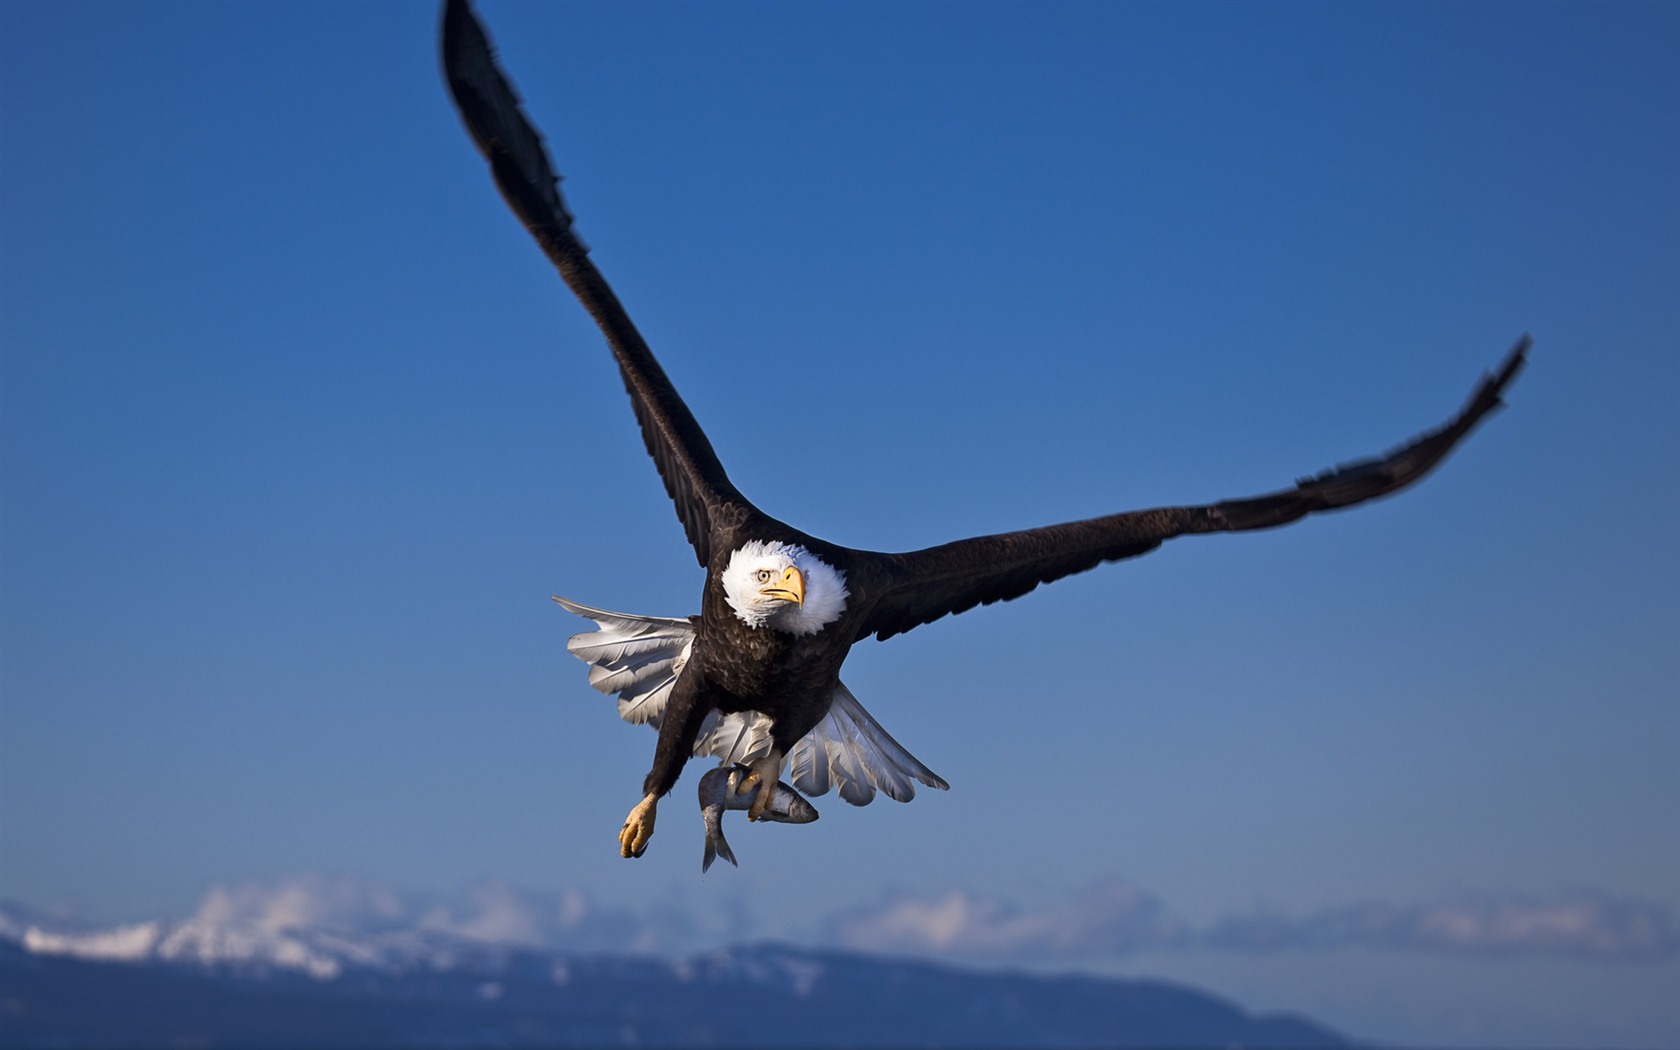 Windows 7 Wallpapers: aves rapaces #2 - 1680x1050